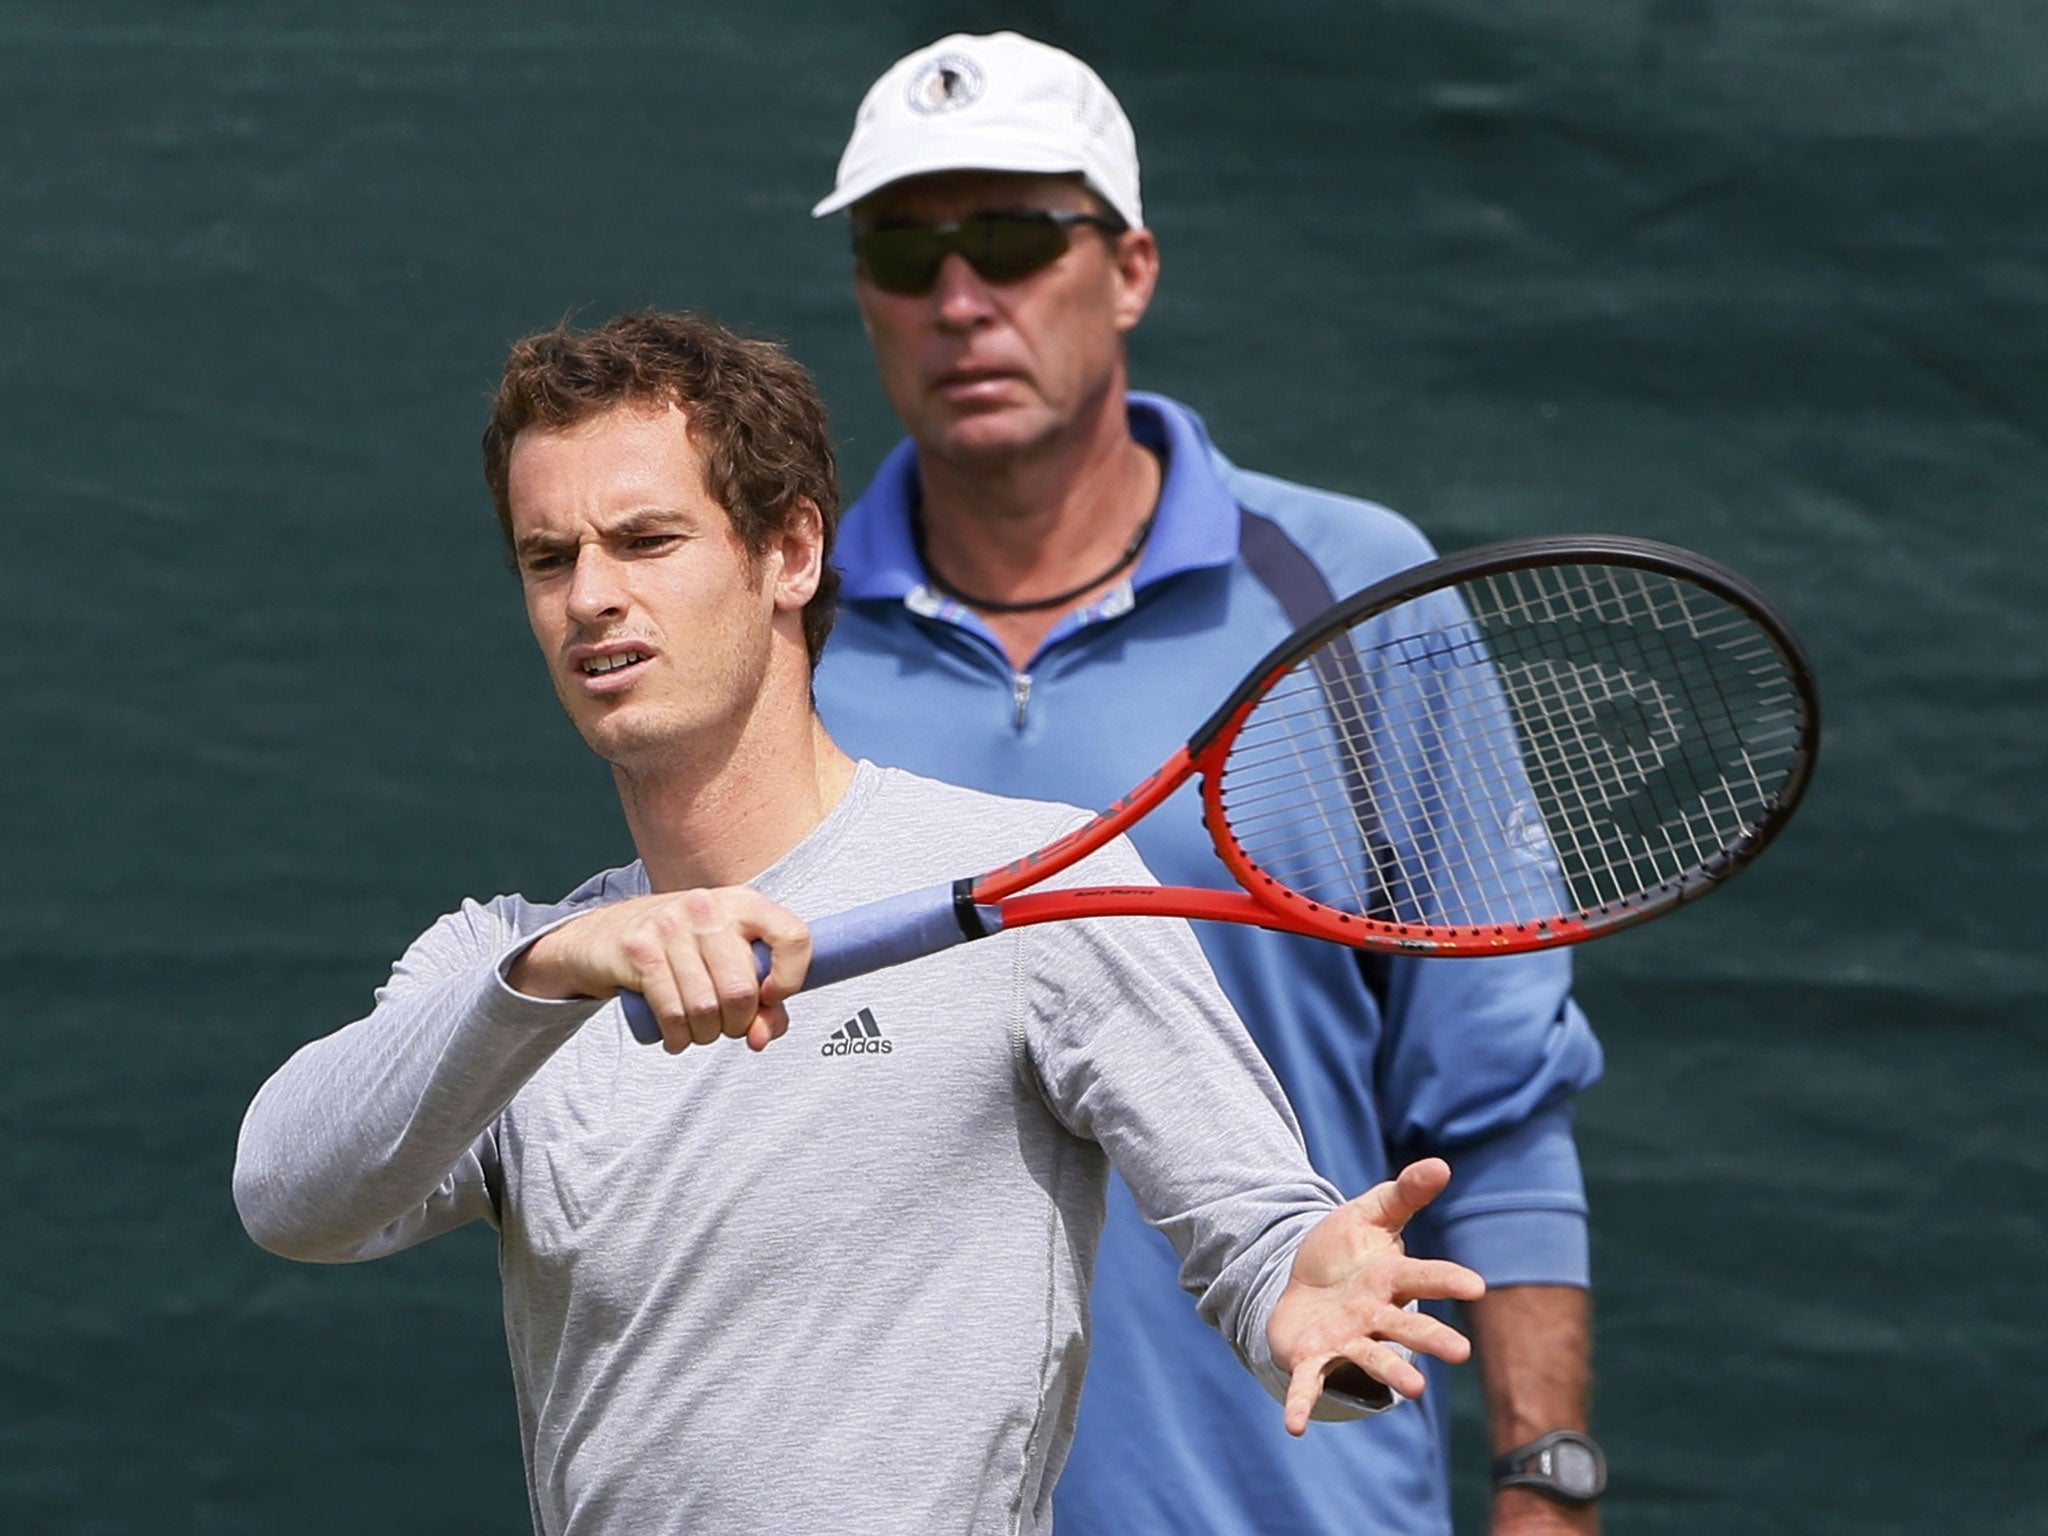 Andy Murray’s game has vastly improved thanks to Ivan Lendl